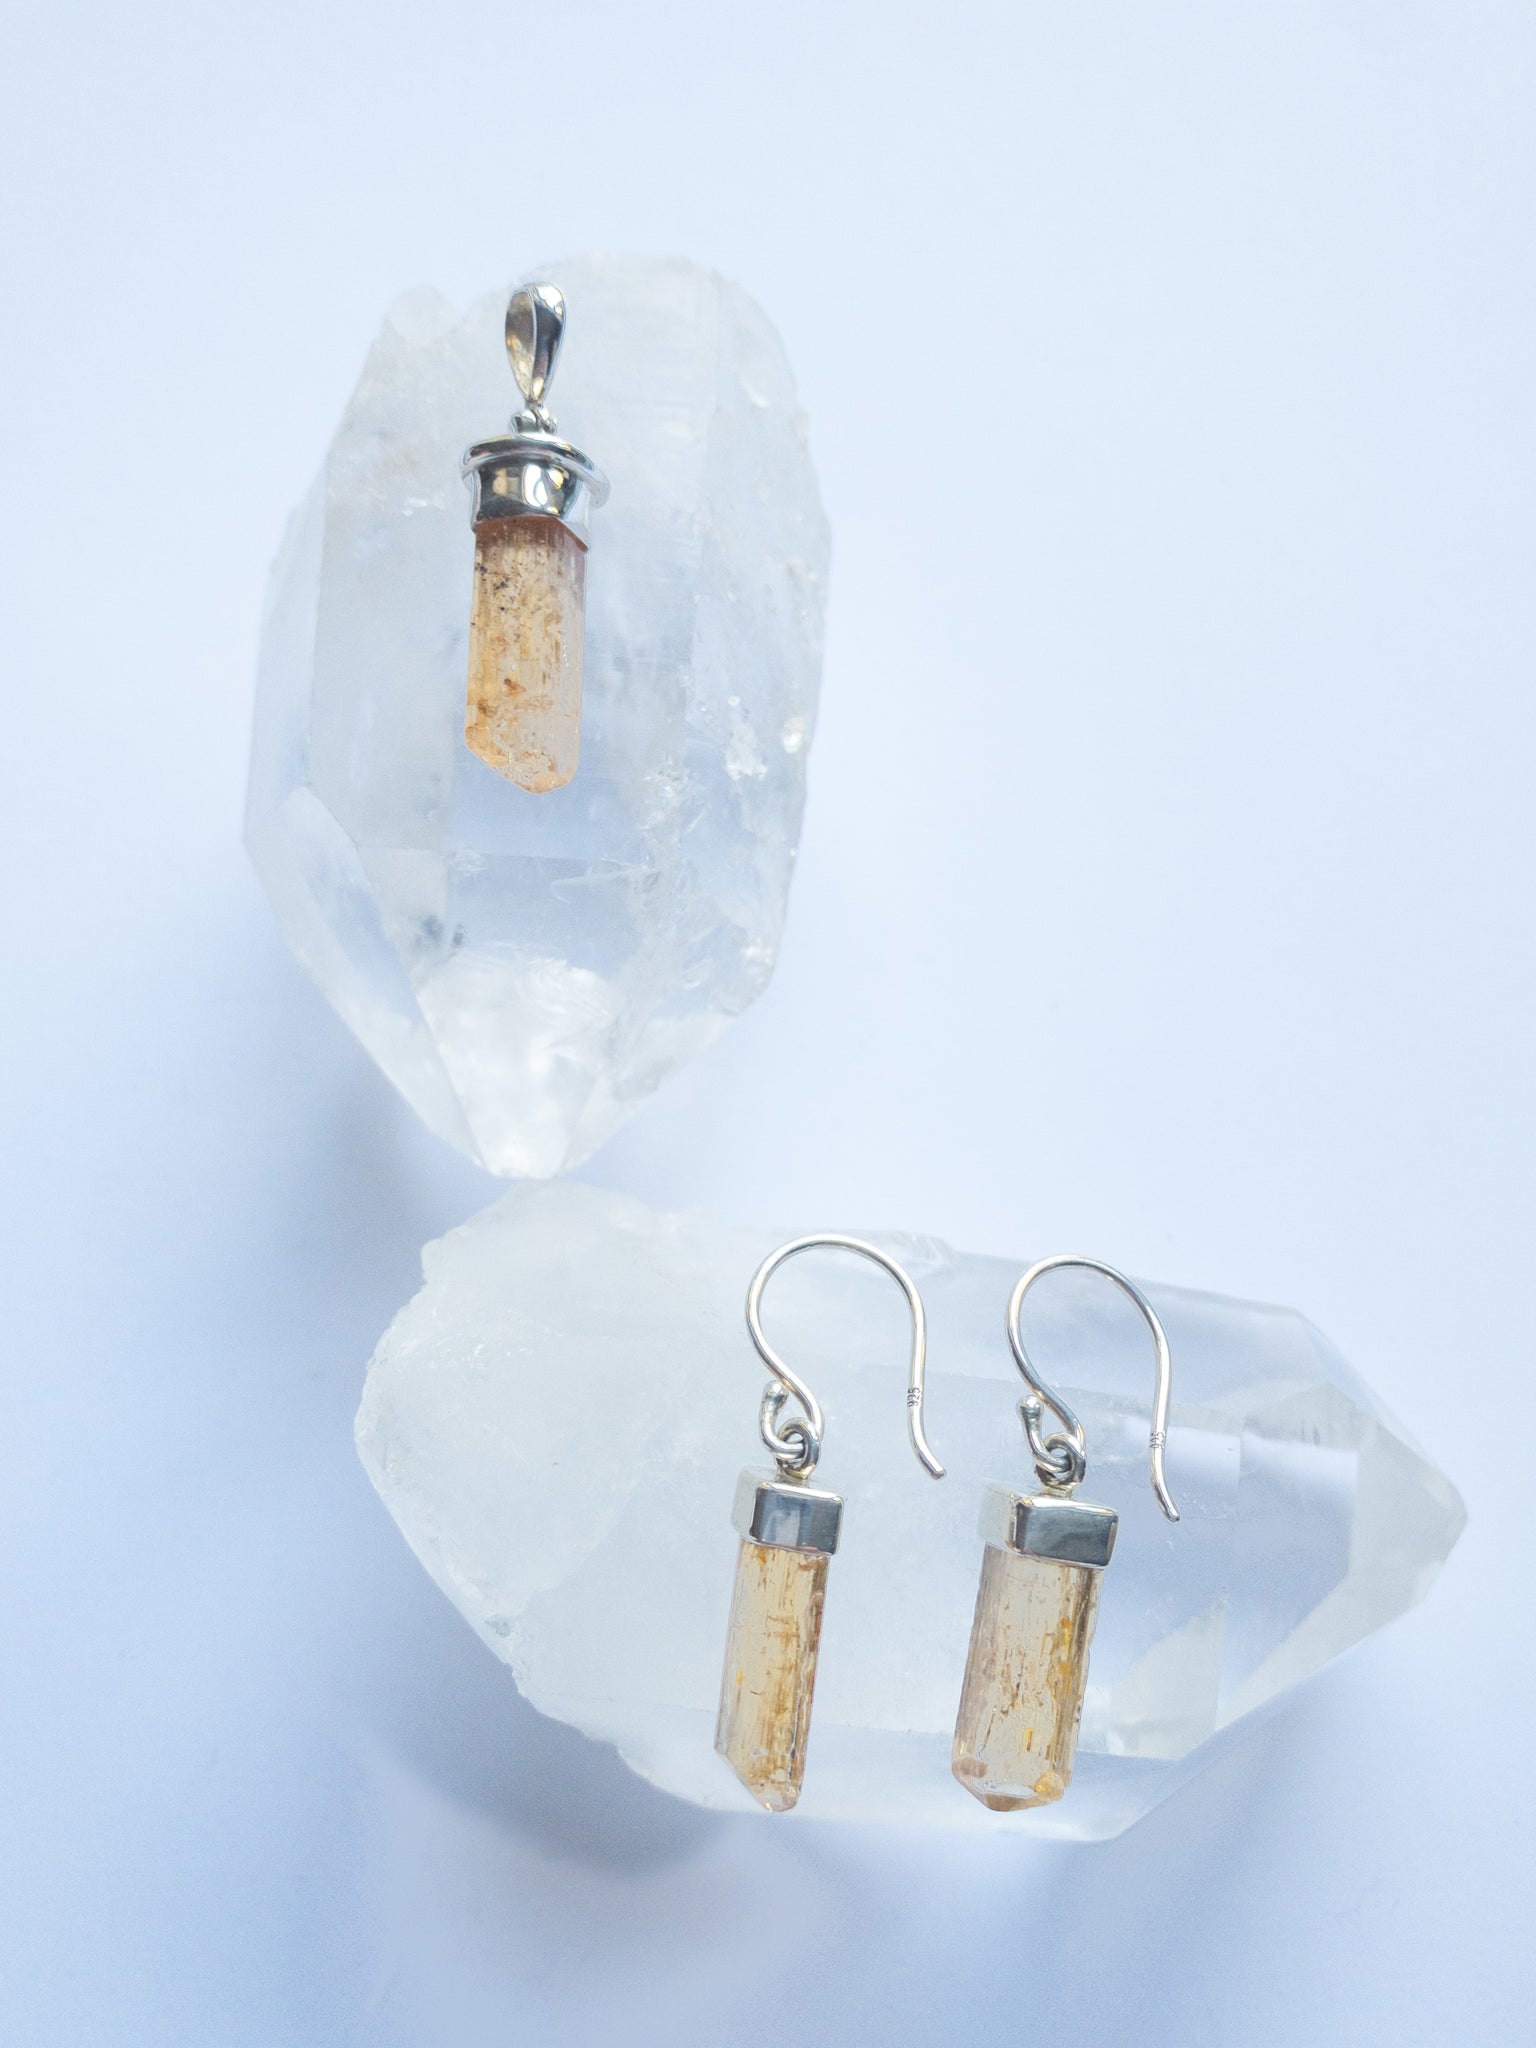 Imperial Topaz Pendant and Earring Set